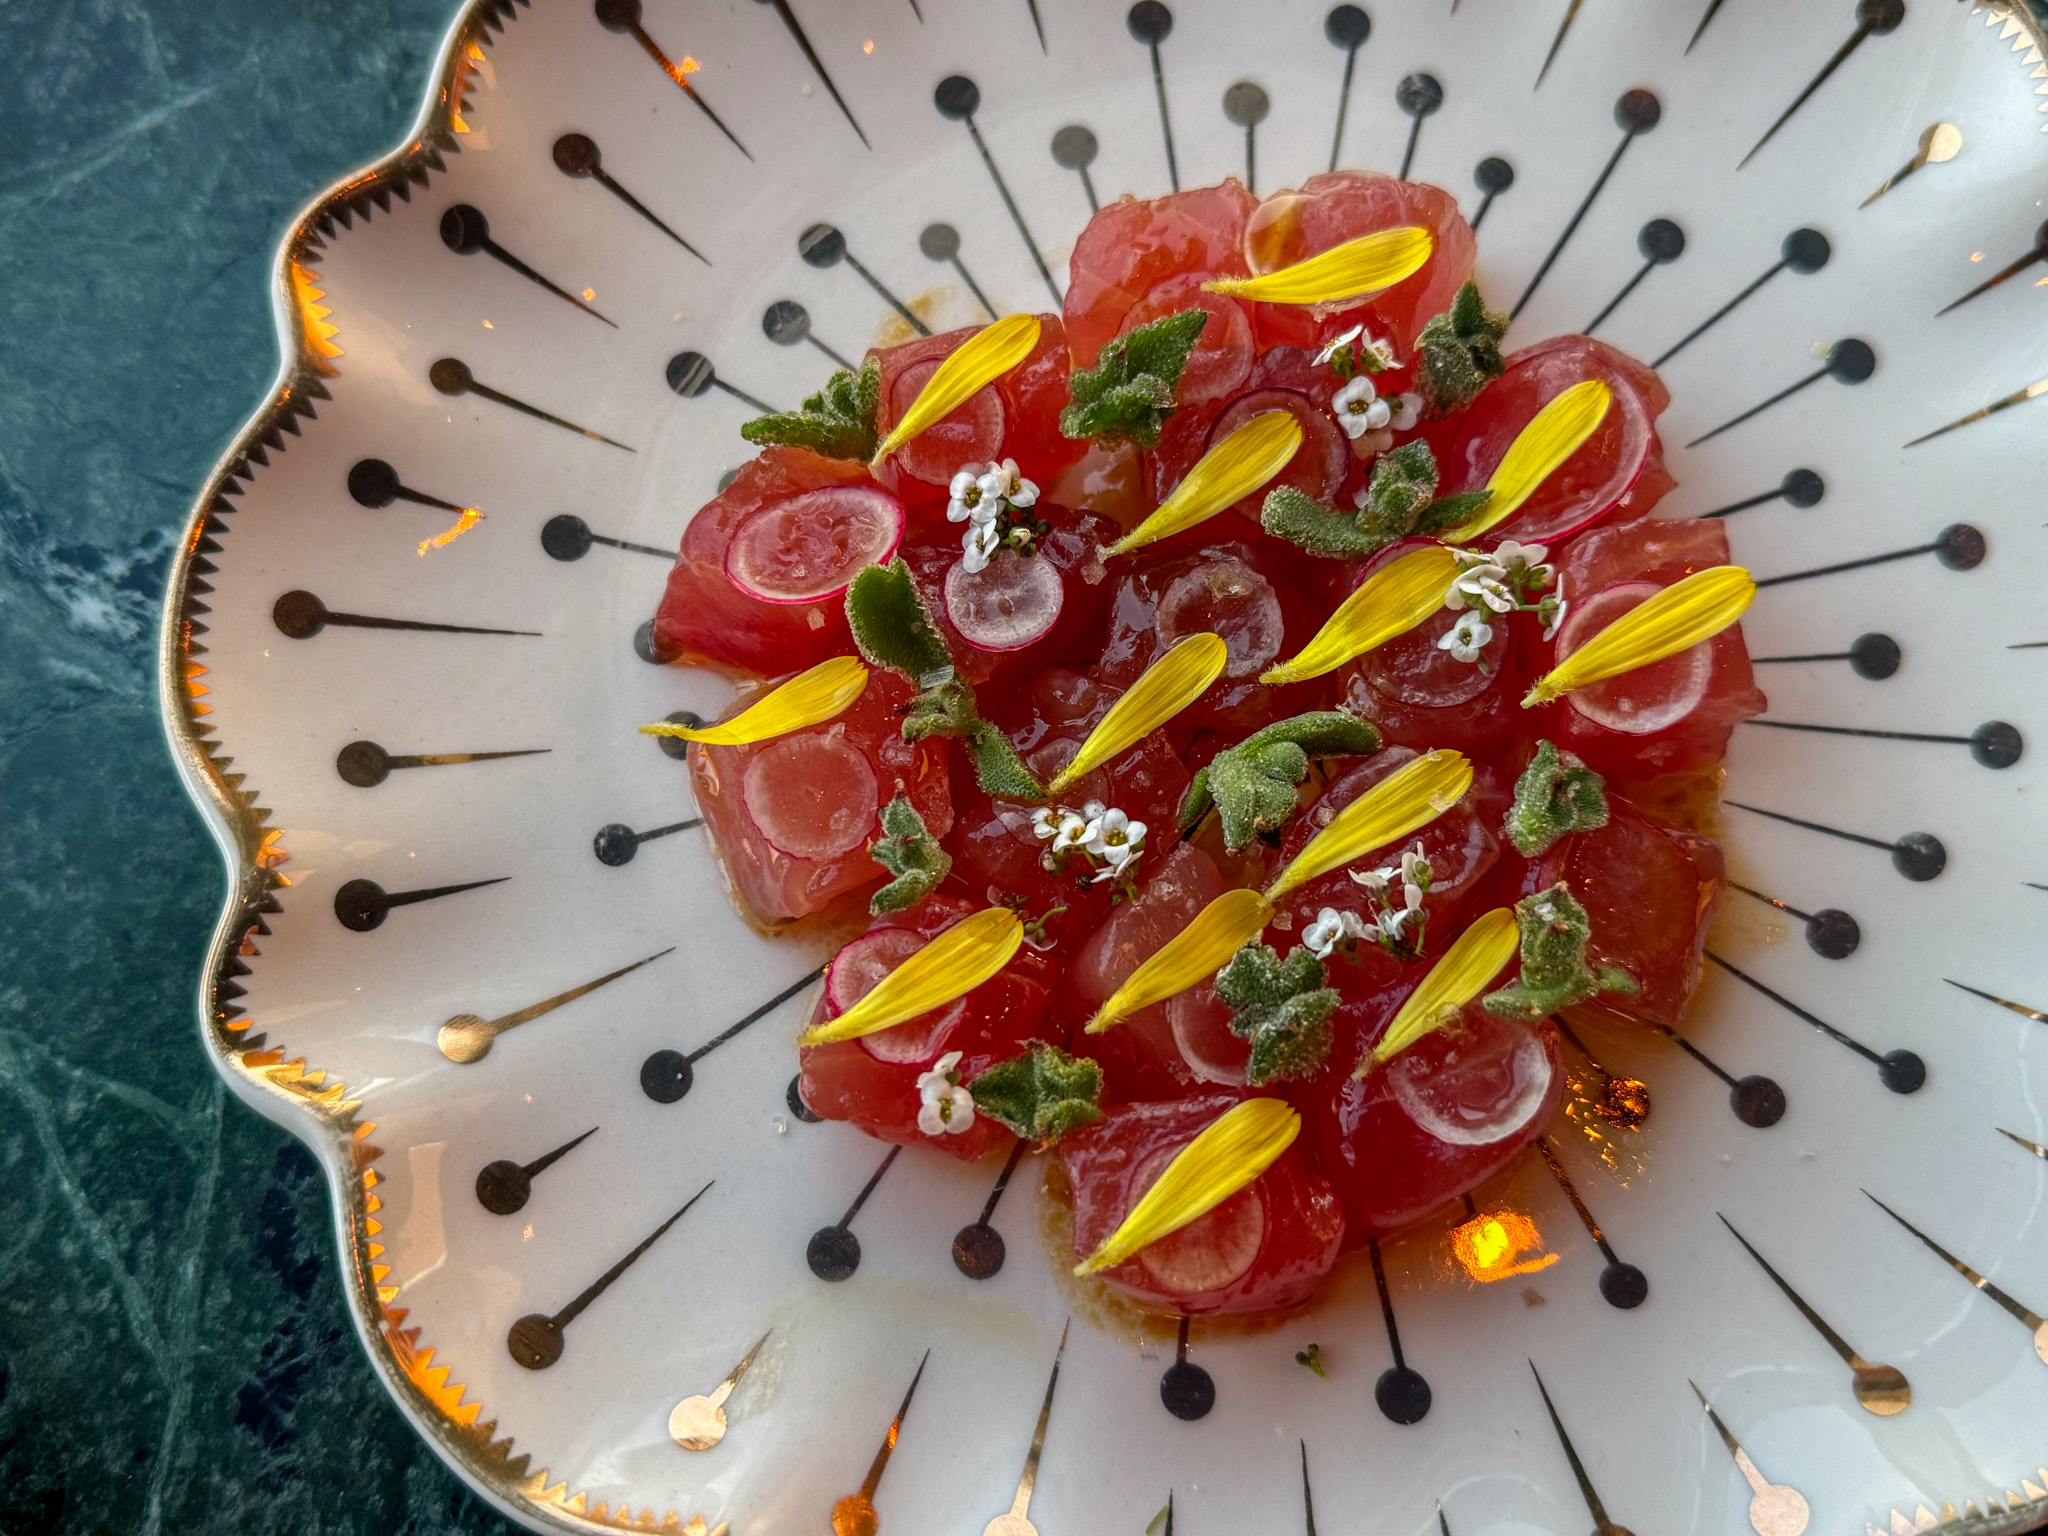 A plate of tuna tartare garnished with flower petals, herbs, and sauce dots.